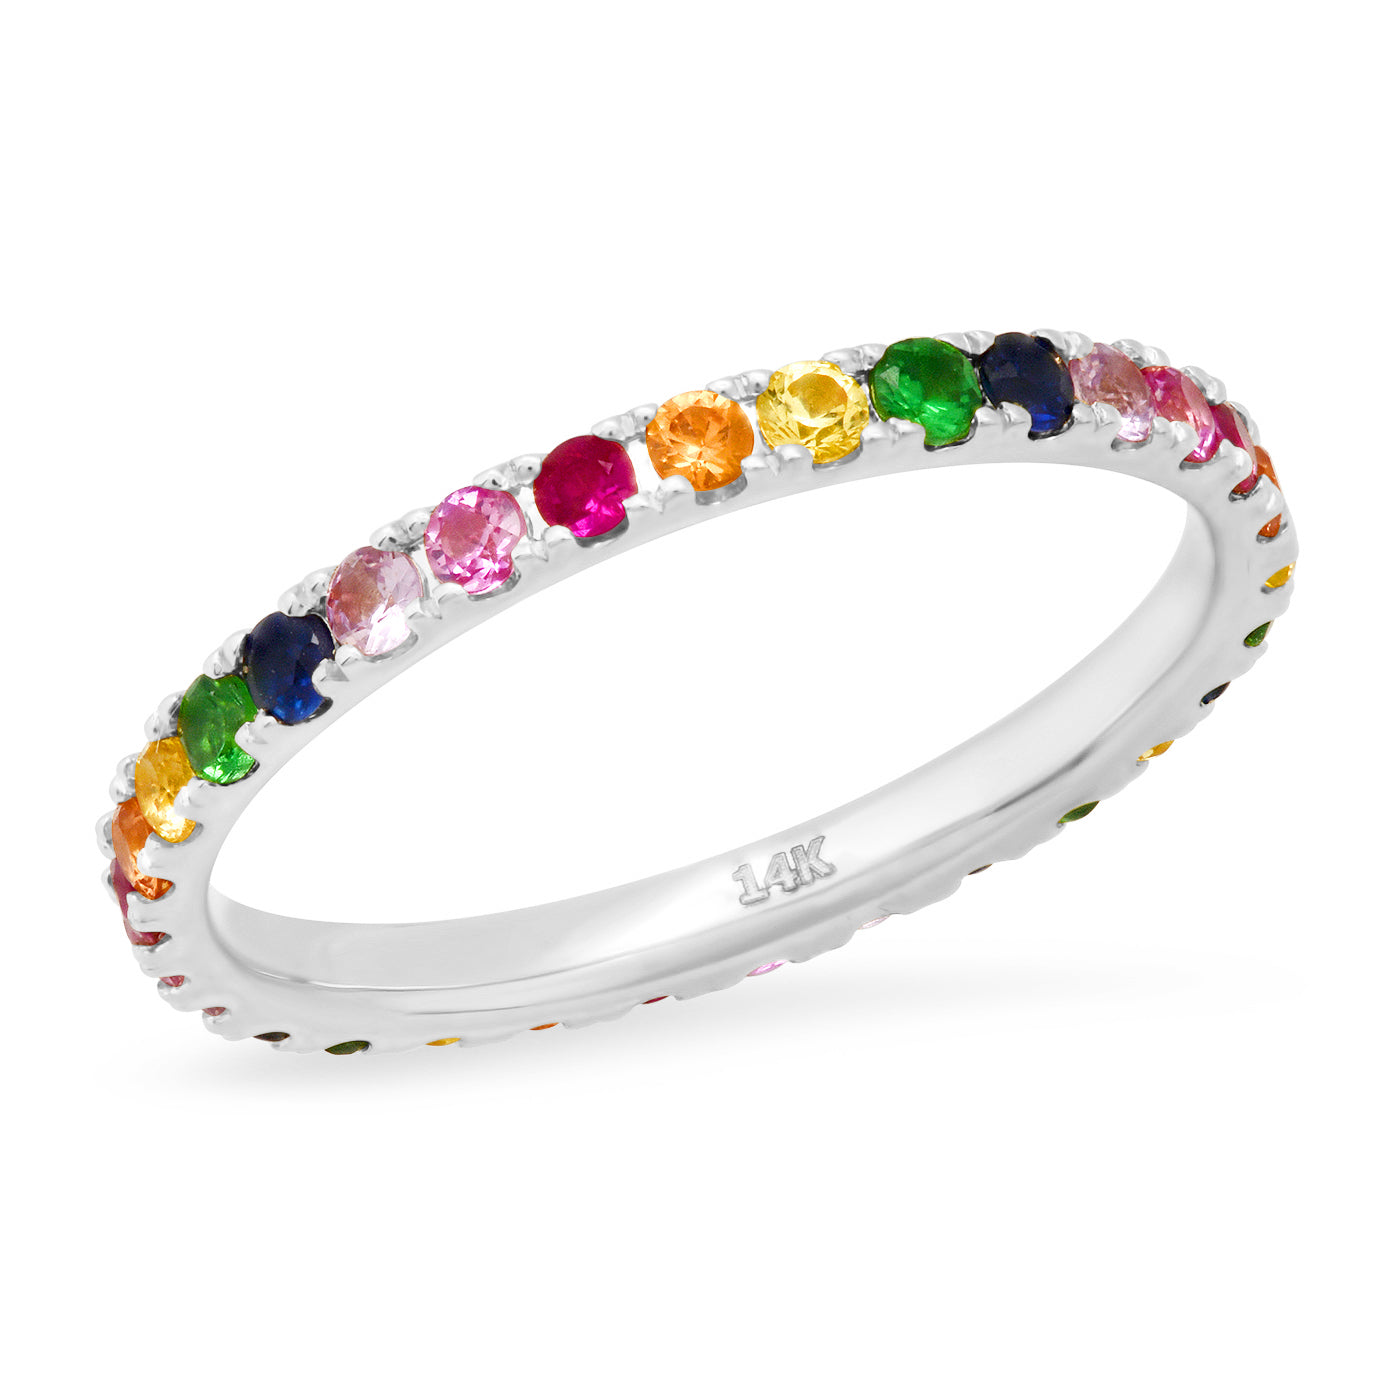 Rainbow Eternity Band in White Gold